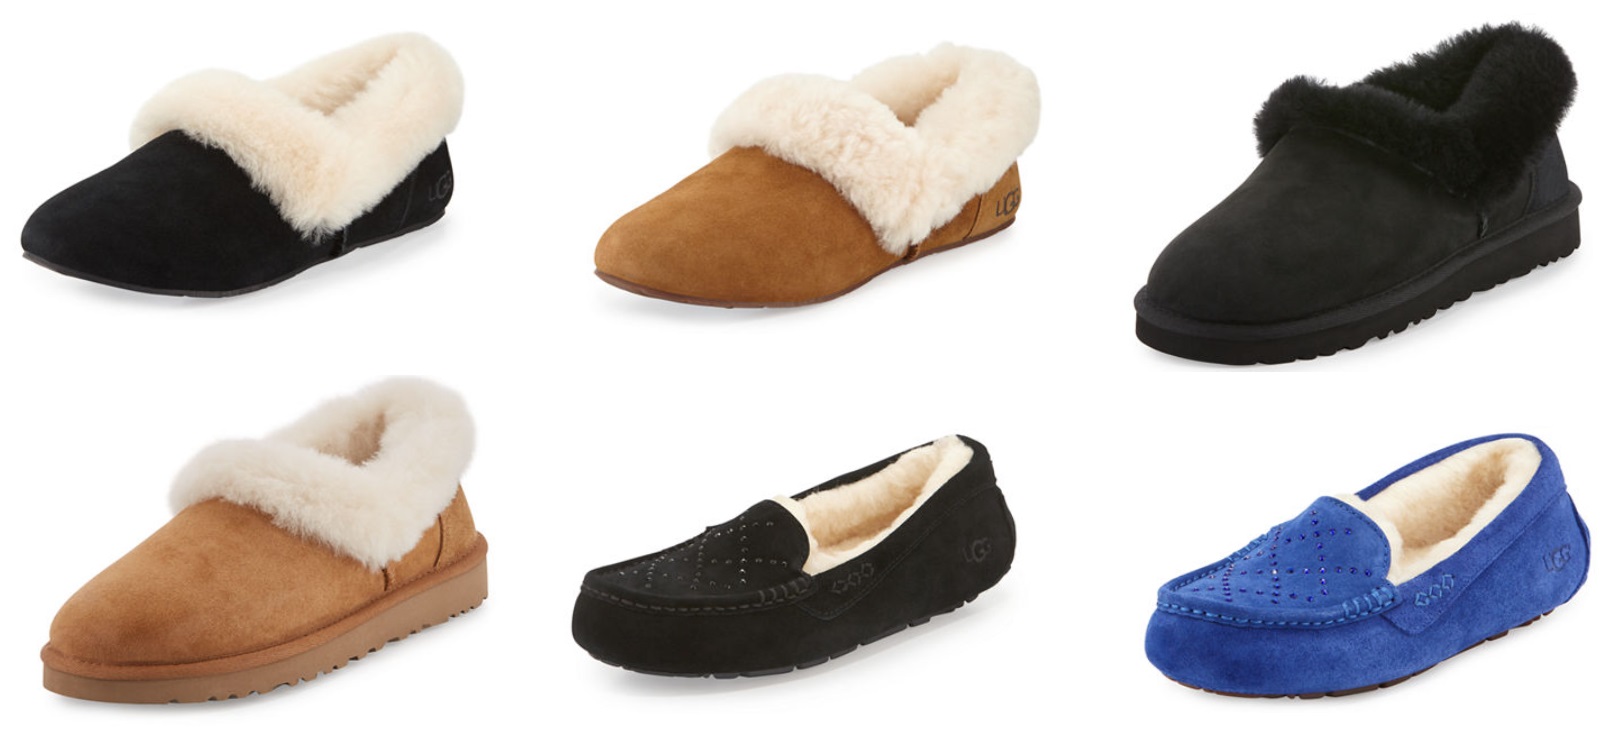 Neiman Marcus: UGG Women's Slippers 40% Off - From Only $51 + Free ...